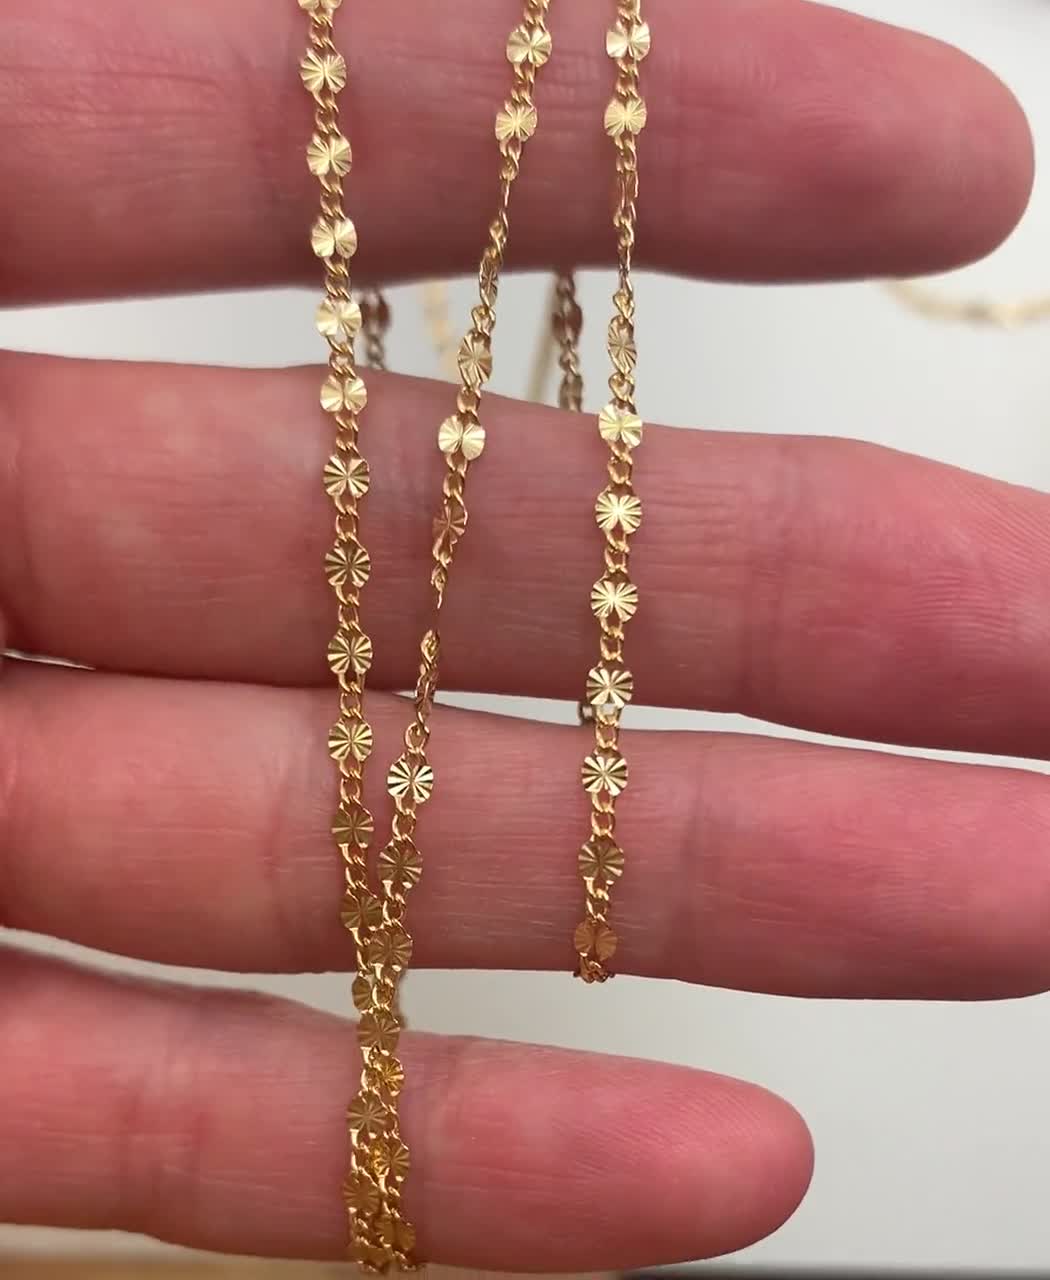 14K Gold Filled Chain for Necklaces, Bulk Chain by the Foot,wholesale  Jewelry Chain Supplies-permanent Jewelry Chain 1 Foot 